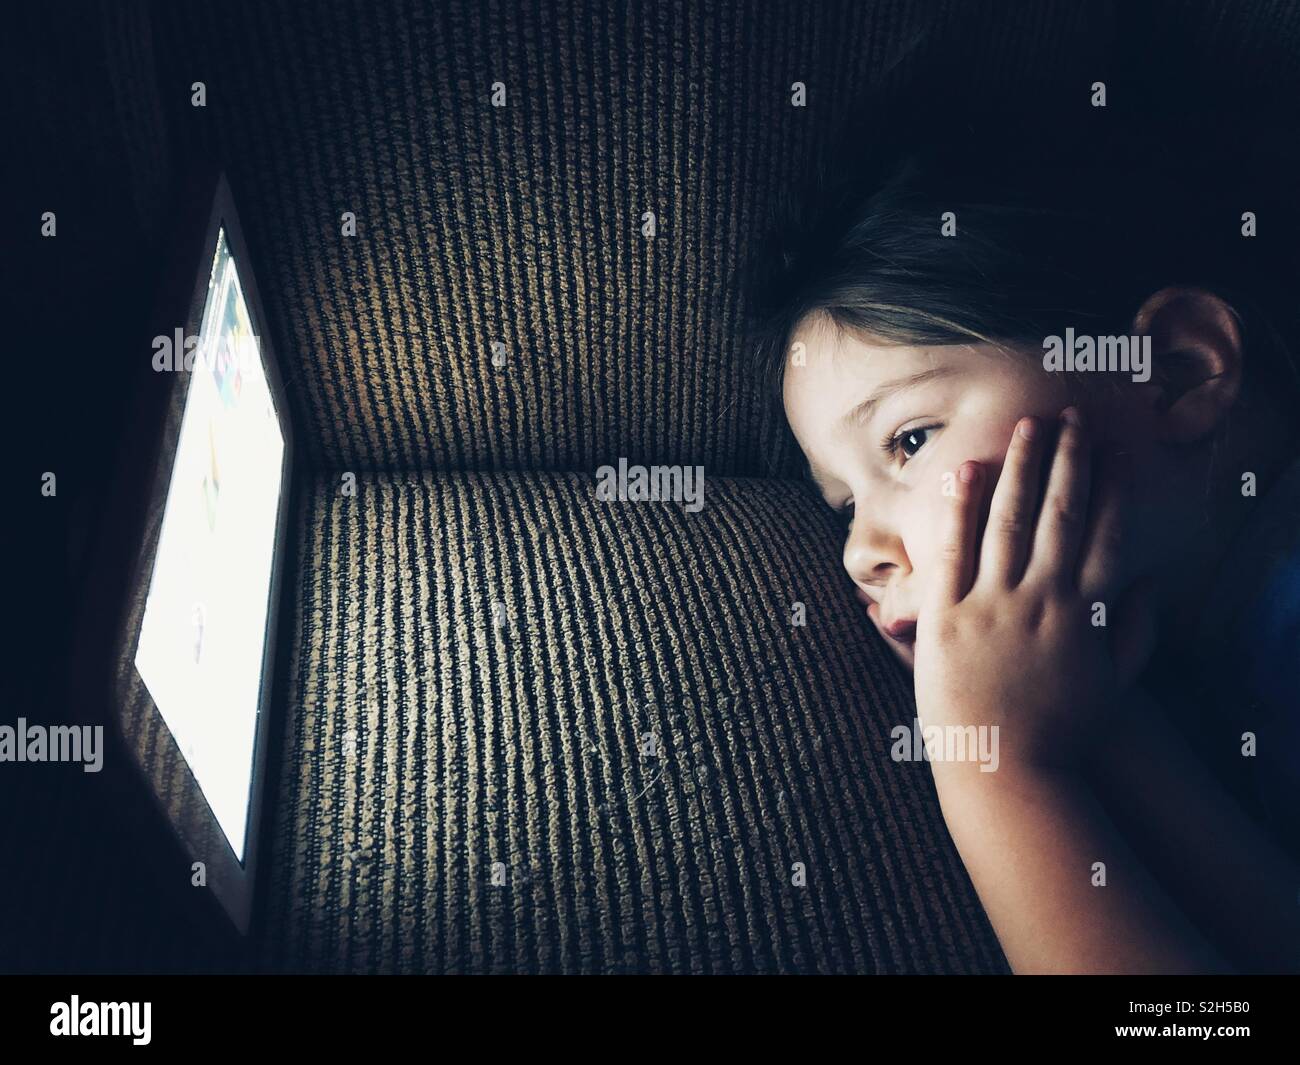 Young child looking at tablet screen in the dark Stock Photo